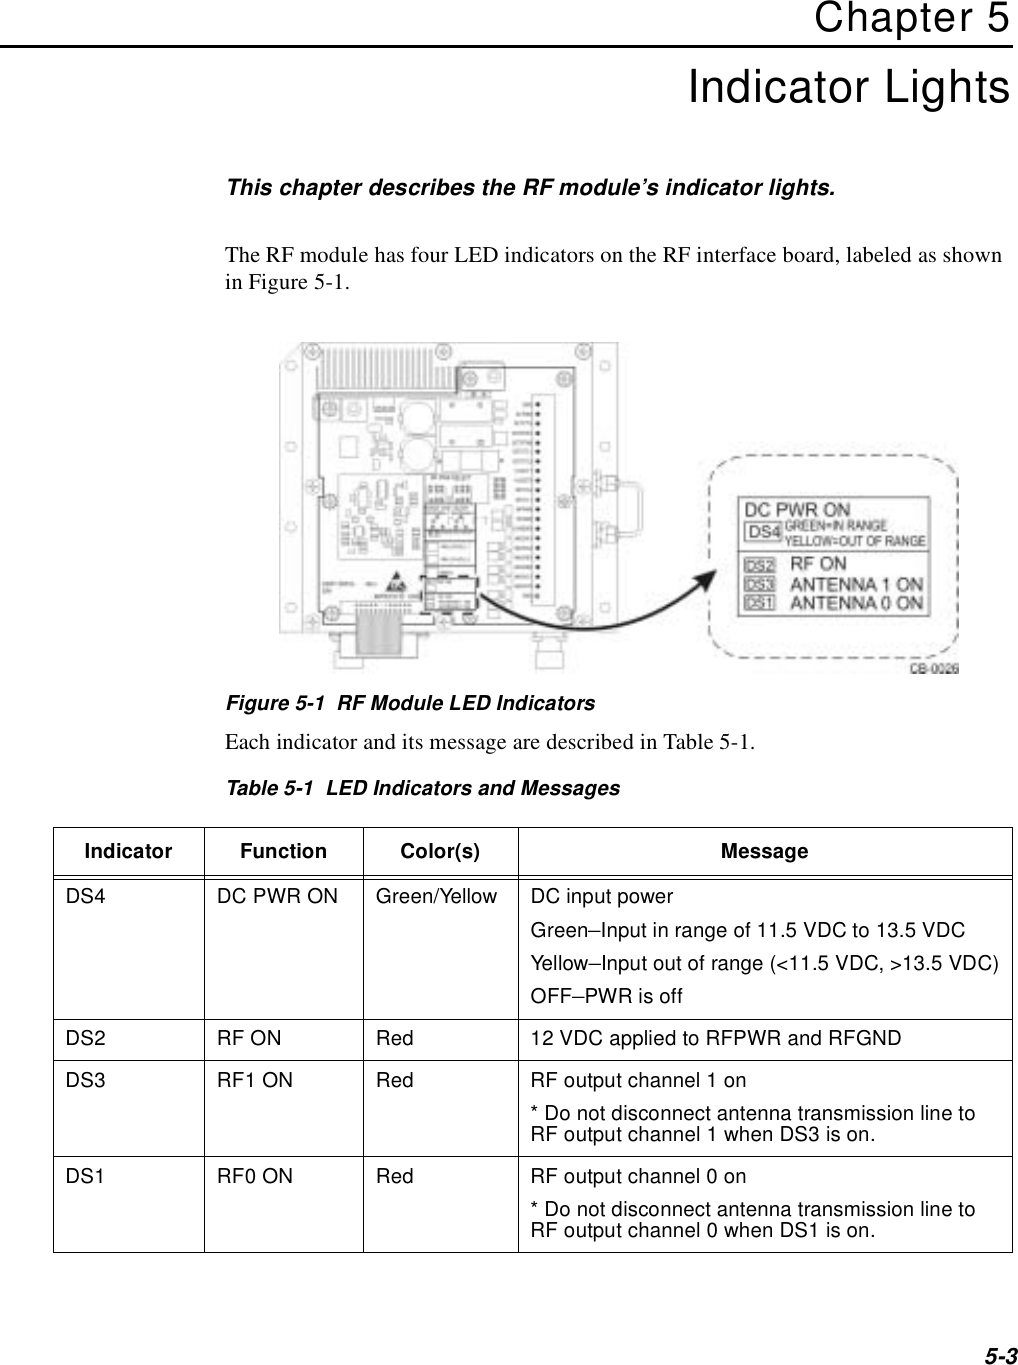 5-3Chapter 5Indicator LightsThis chapter describes the RF module’s indicator lights.The RF module has four LED indicators on the RF interface board, labeled as shown in Figure 5-1.Figure 5-1  RF Module LED IndicatorsEach indicator and its message are described in Table 5-1.Table 5-1  LED Indicators and MessagesIndicator Function Color(s) MessageDS4 DC PWR ON Green/Yellow DC input powerGreen–Input in range of 11.5 VDC to 13.5 VDCYellow–Input out of range (&lt;11.5 VDC, &gt;13.5 VDC)OFF–PWR is offDS2 RF ON Red 12 VDC applied to RFPWR and RFGNDDS3 RF1 ON Red RF output channel 1 on* Do not disconnect antenna transmission line to RF output channel 1 when DS3 is on.DS1 RF0 ON Red RF output channel 0 on* Do not disconnect antenna transmission line to RF output channel 0 when DS1 is on.